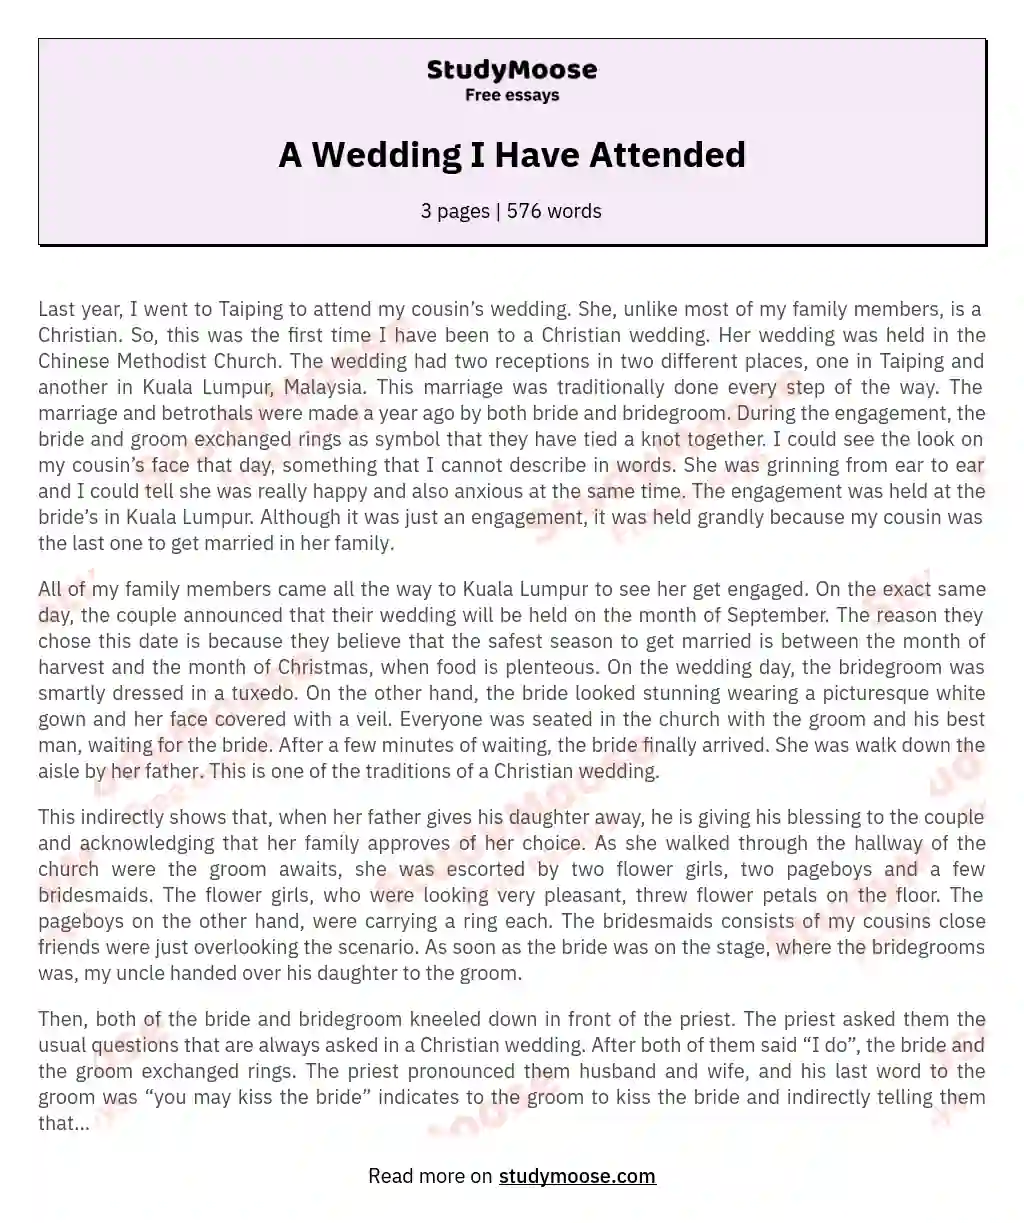 A Wedding I Have Attended essay